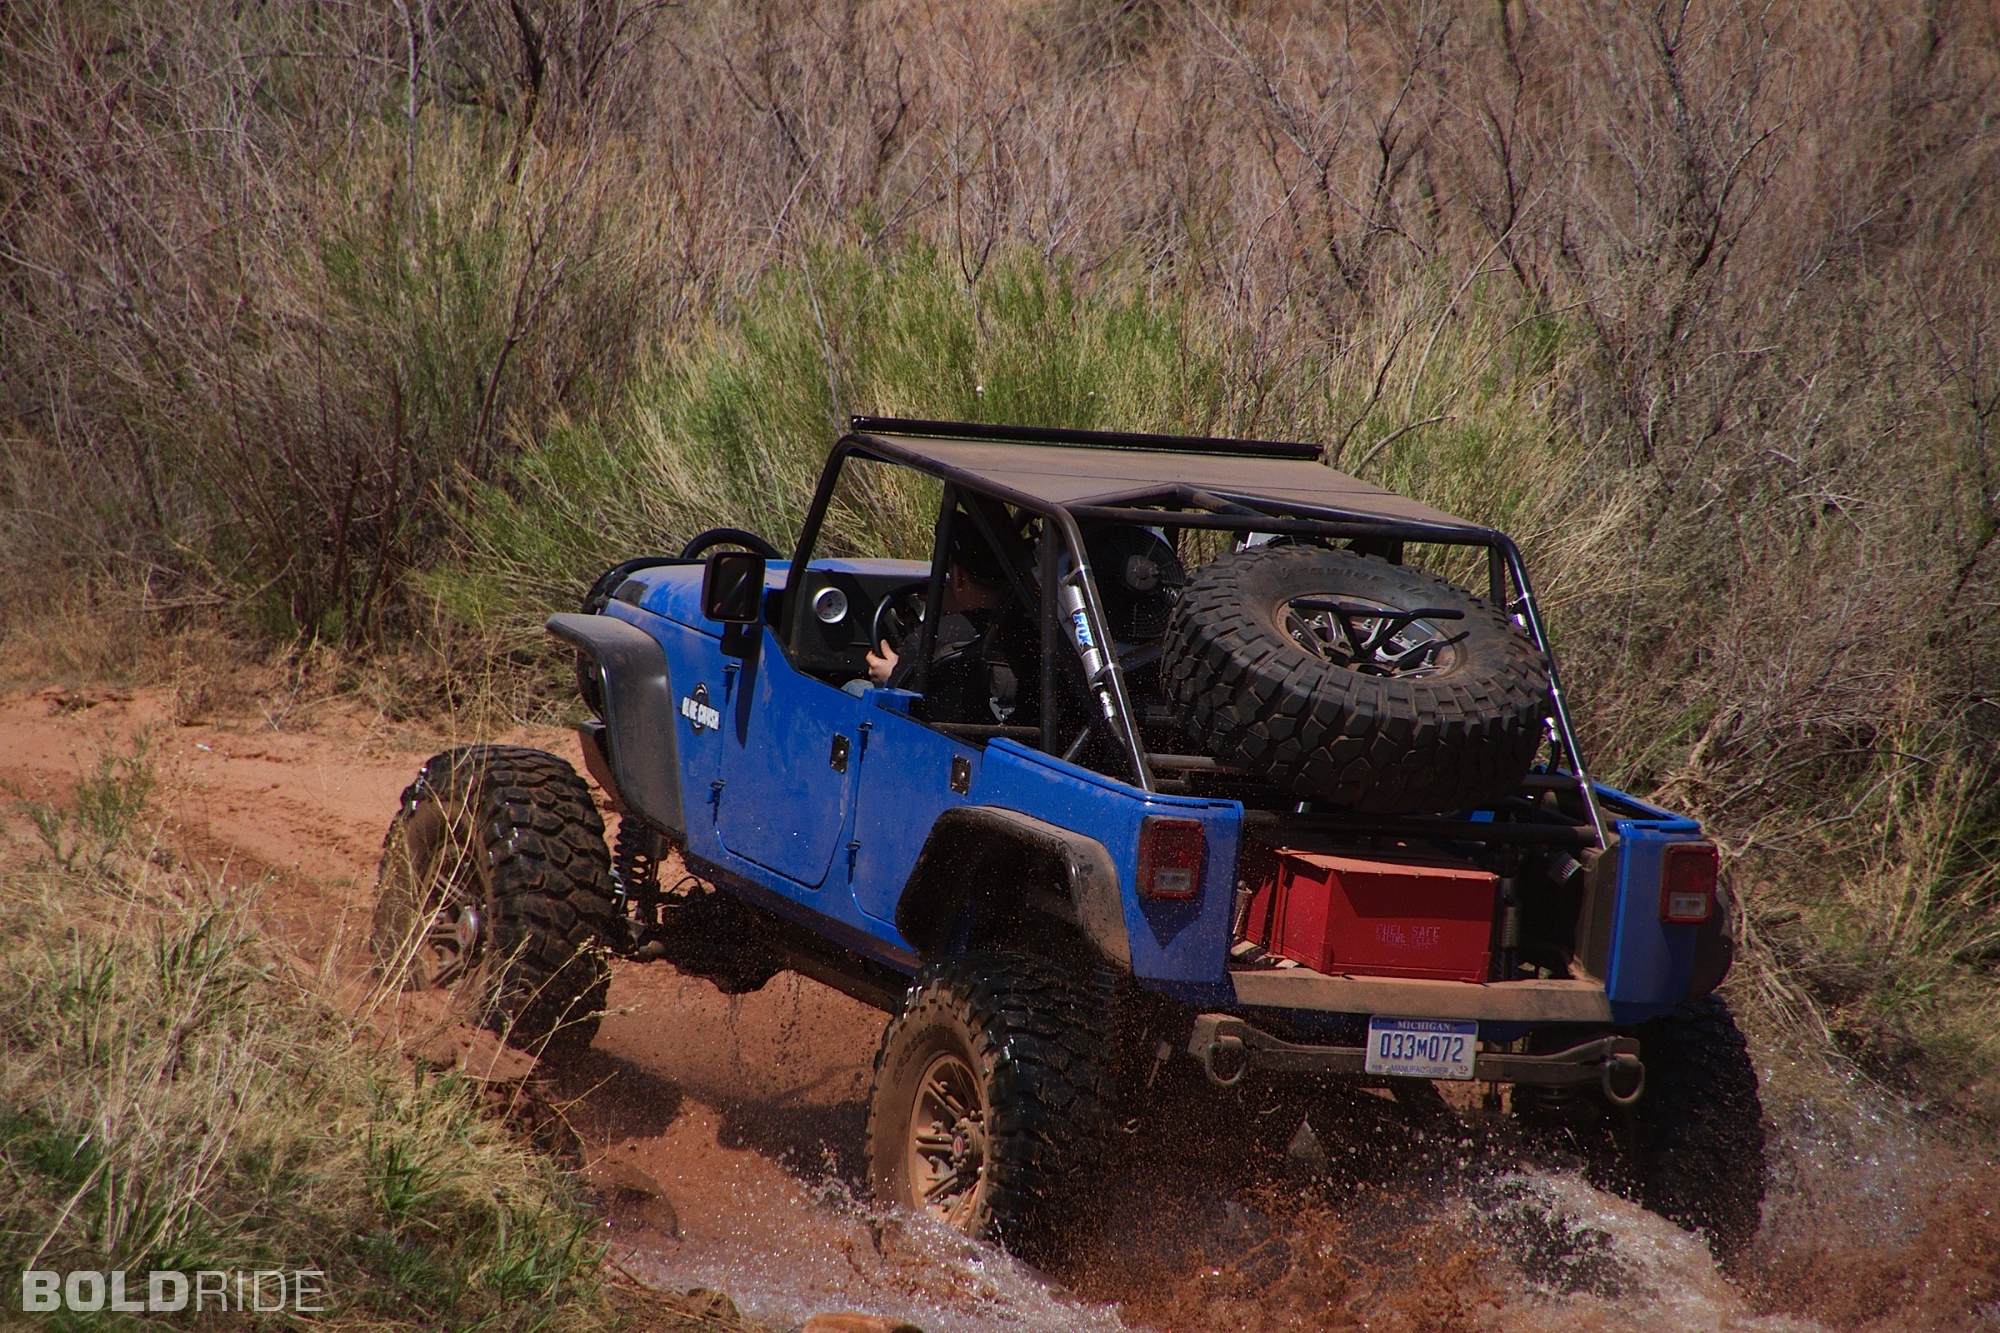 Vehicles Jeep Wrangler HD Wallpaper | Background Image